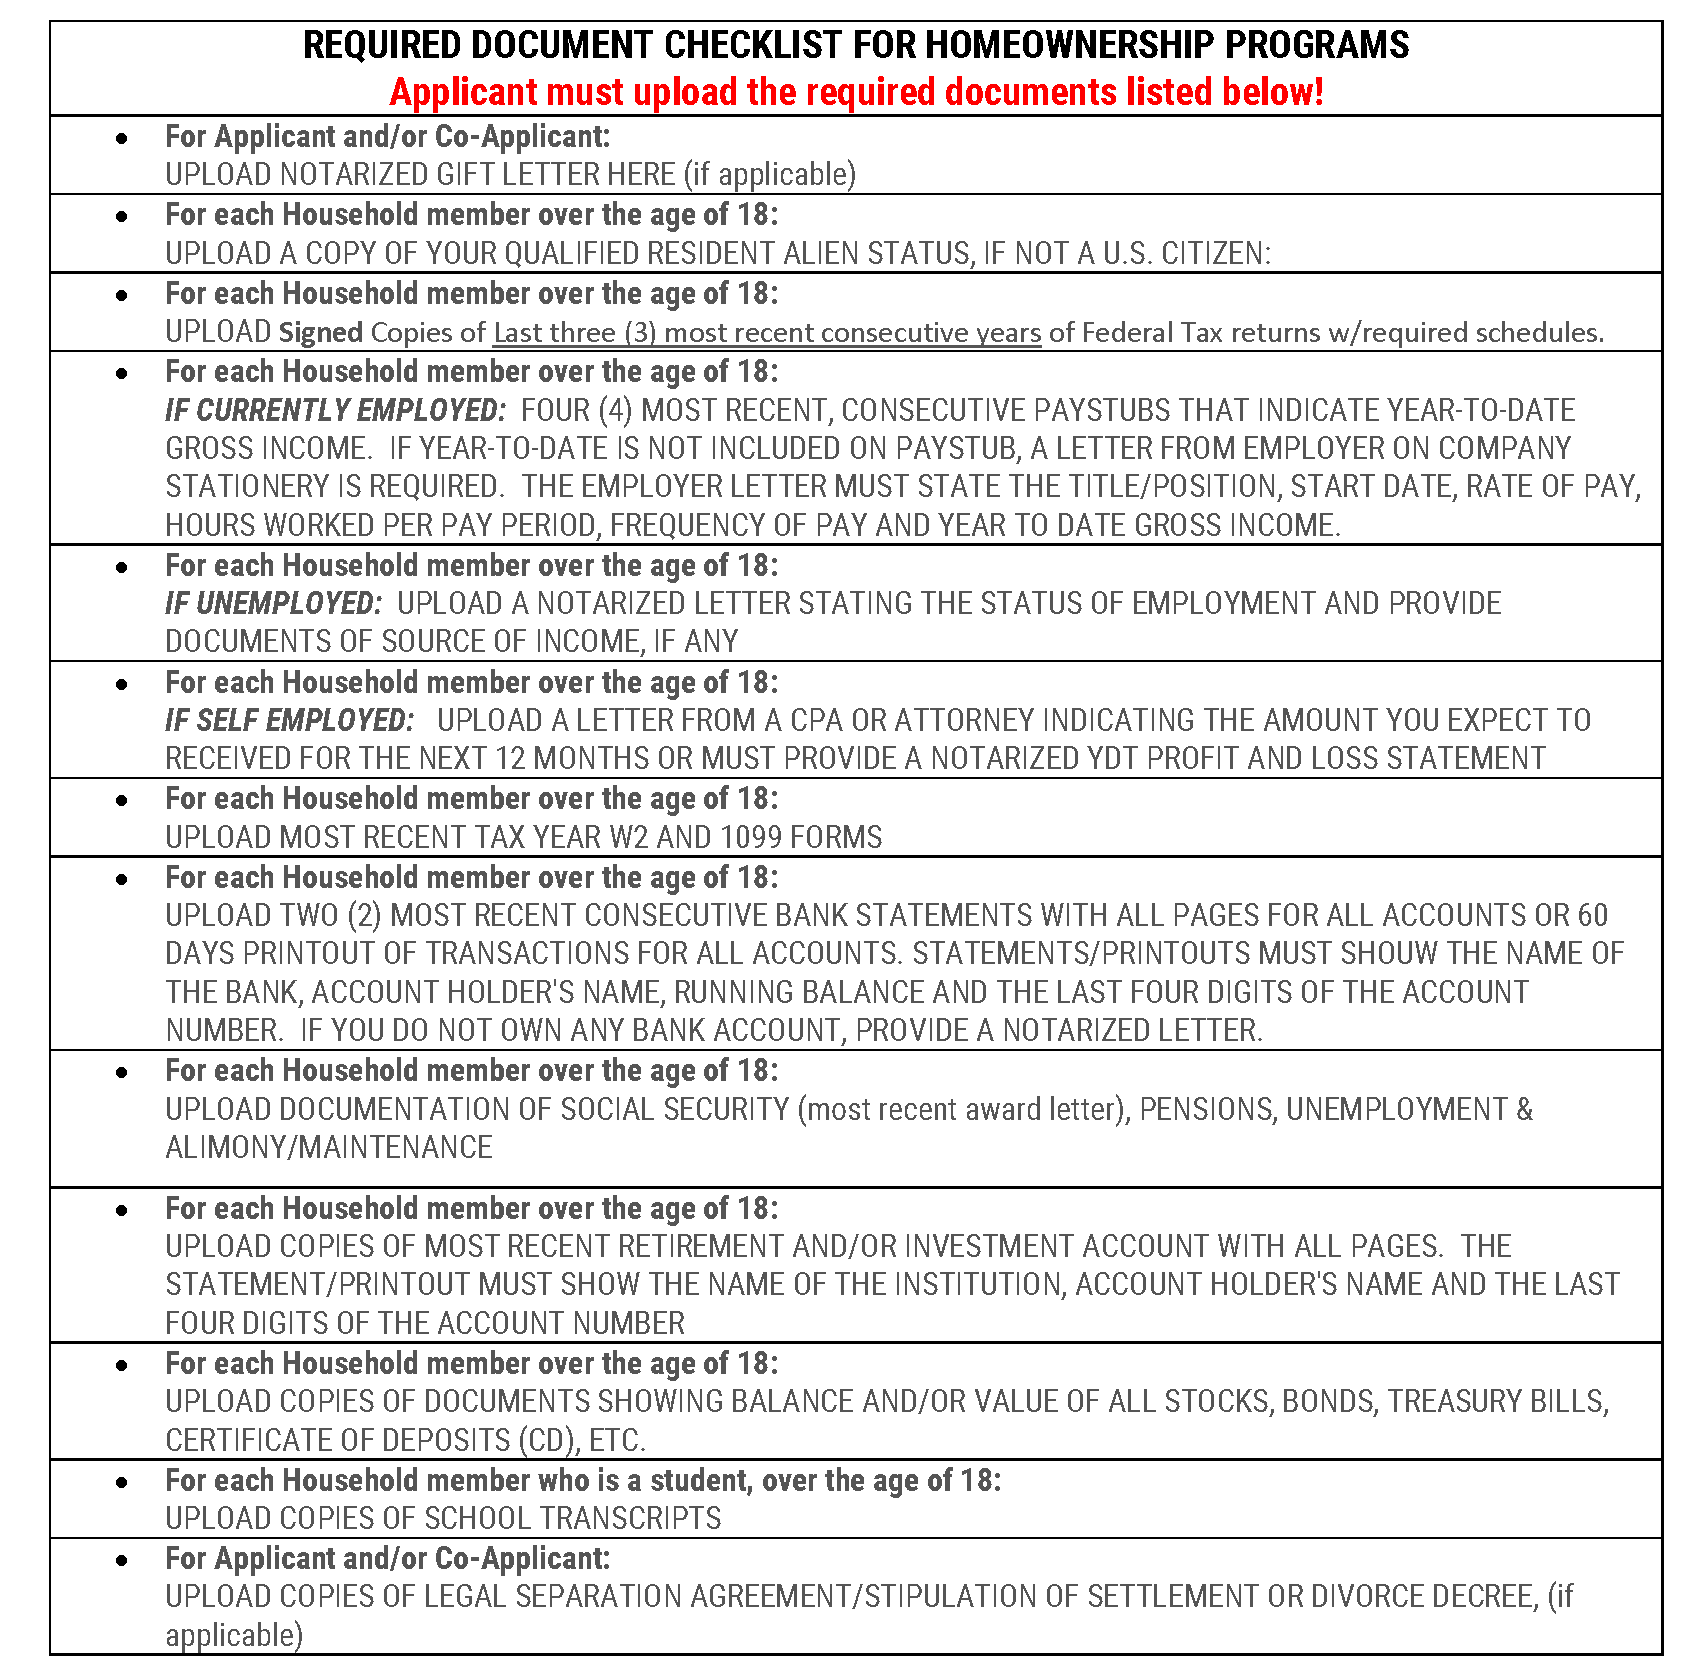 Homeownership_Programs_Checklist_Required_Documents